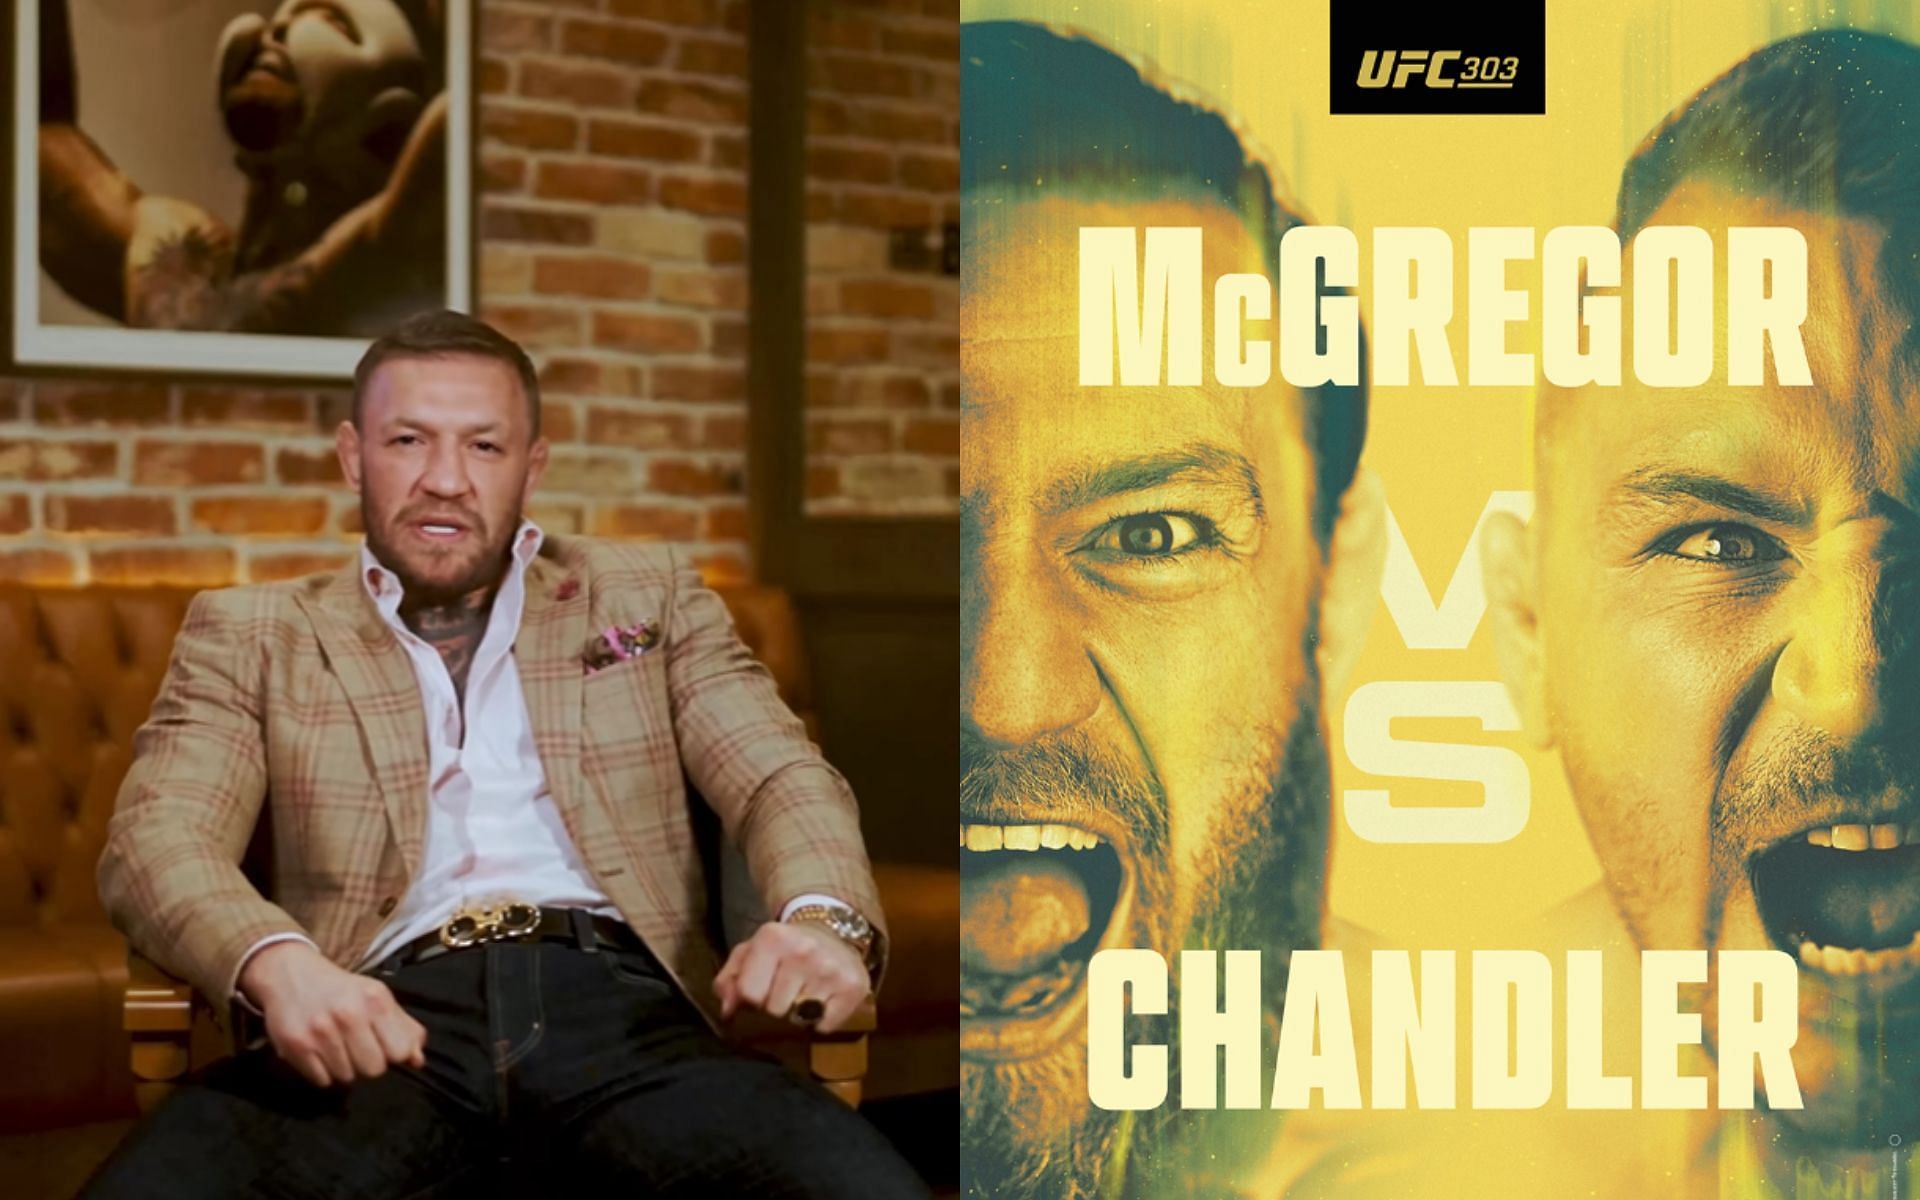 Conor McGregor (left) apologizes for the postponement of the UFC 303 press conference (right). [Image credit: the UFC and Conor McGregor